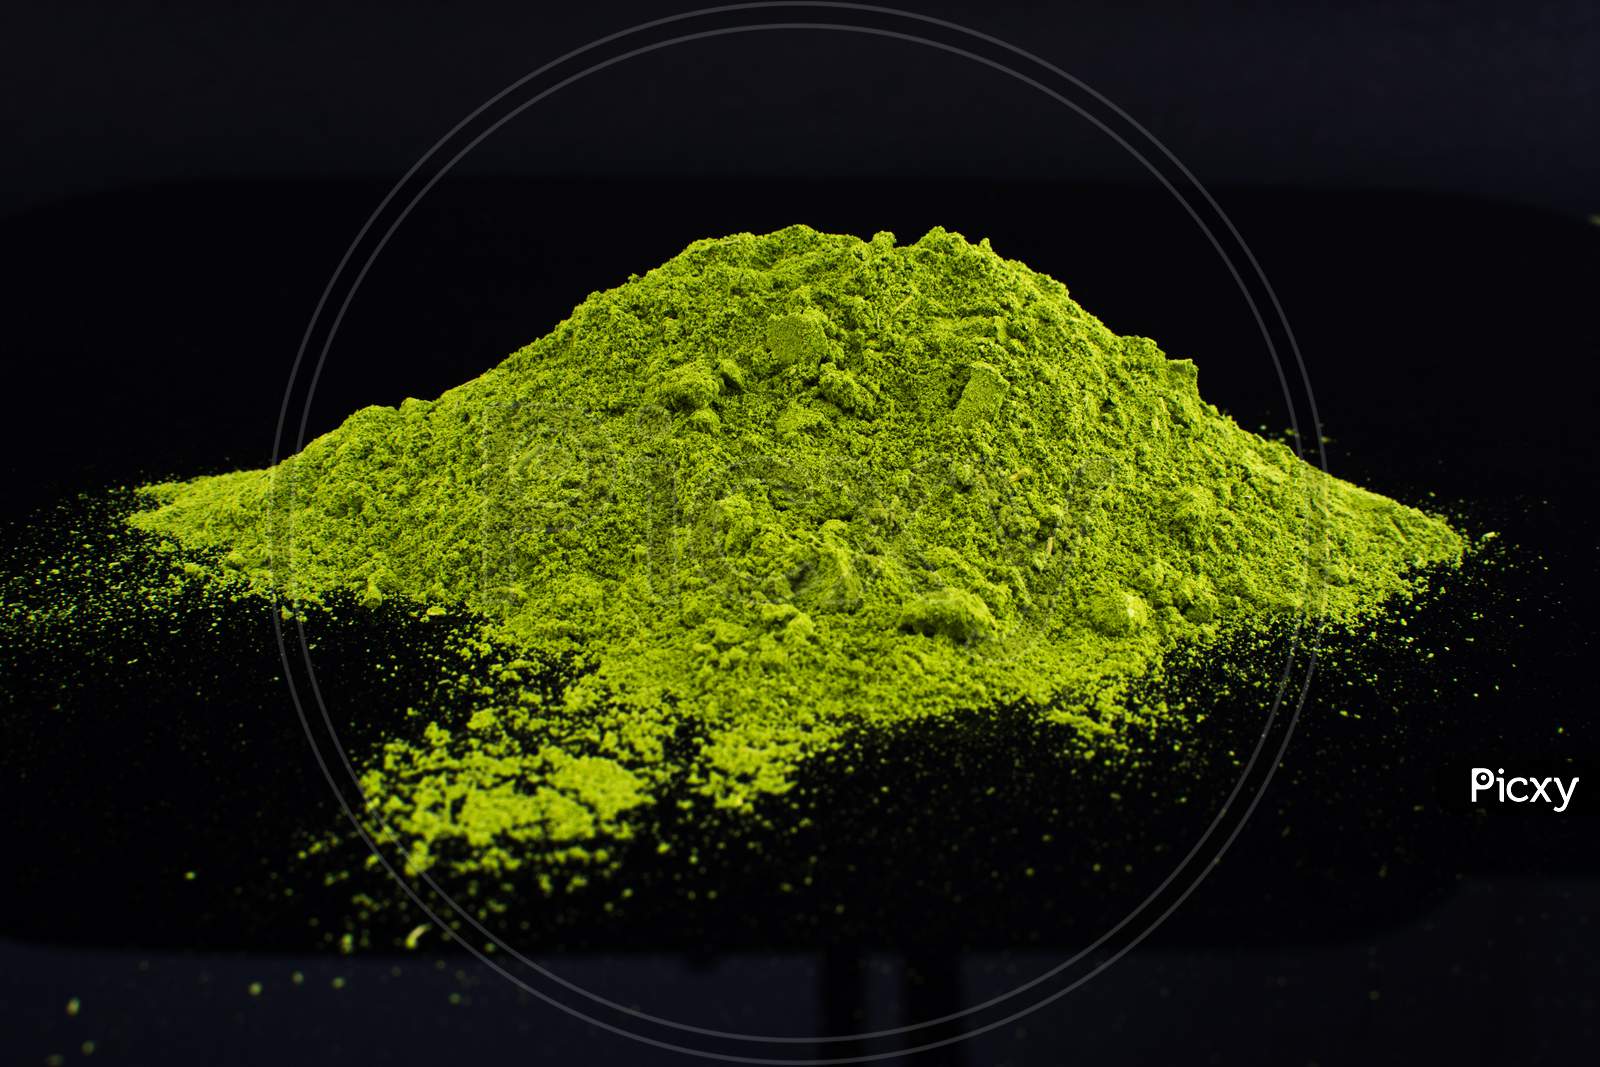 Green powdered herbal substance